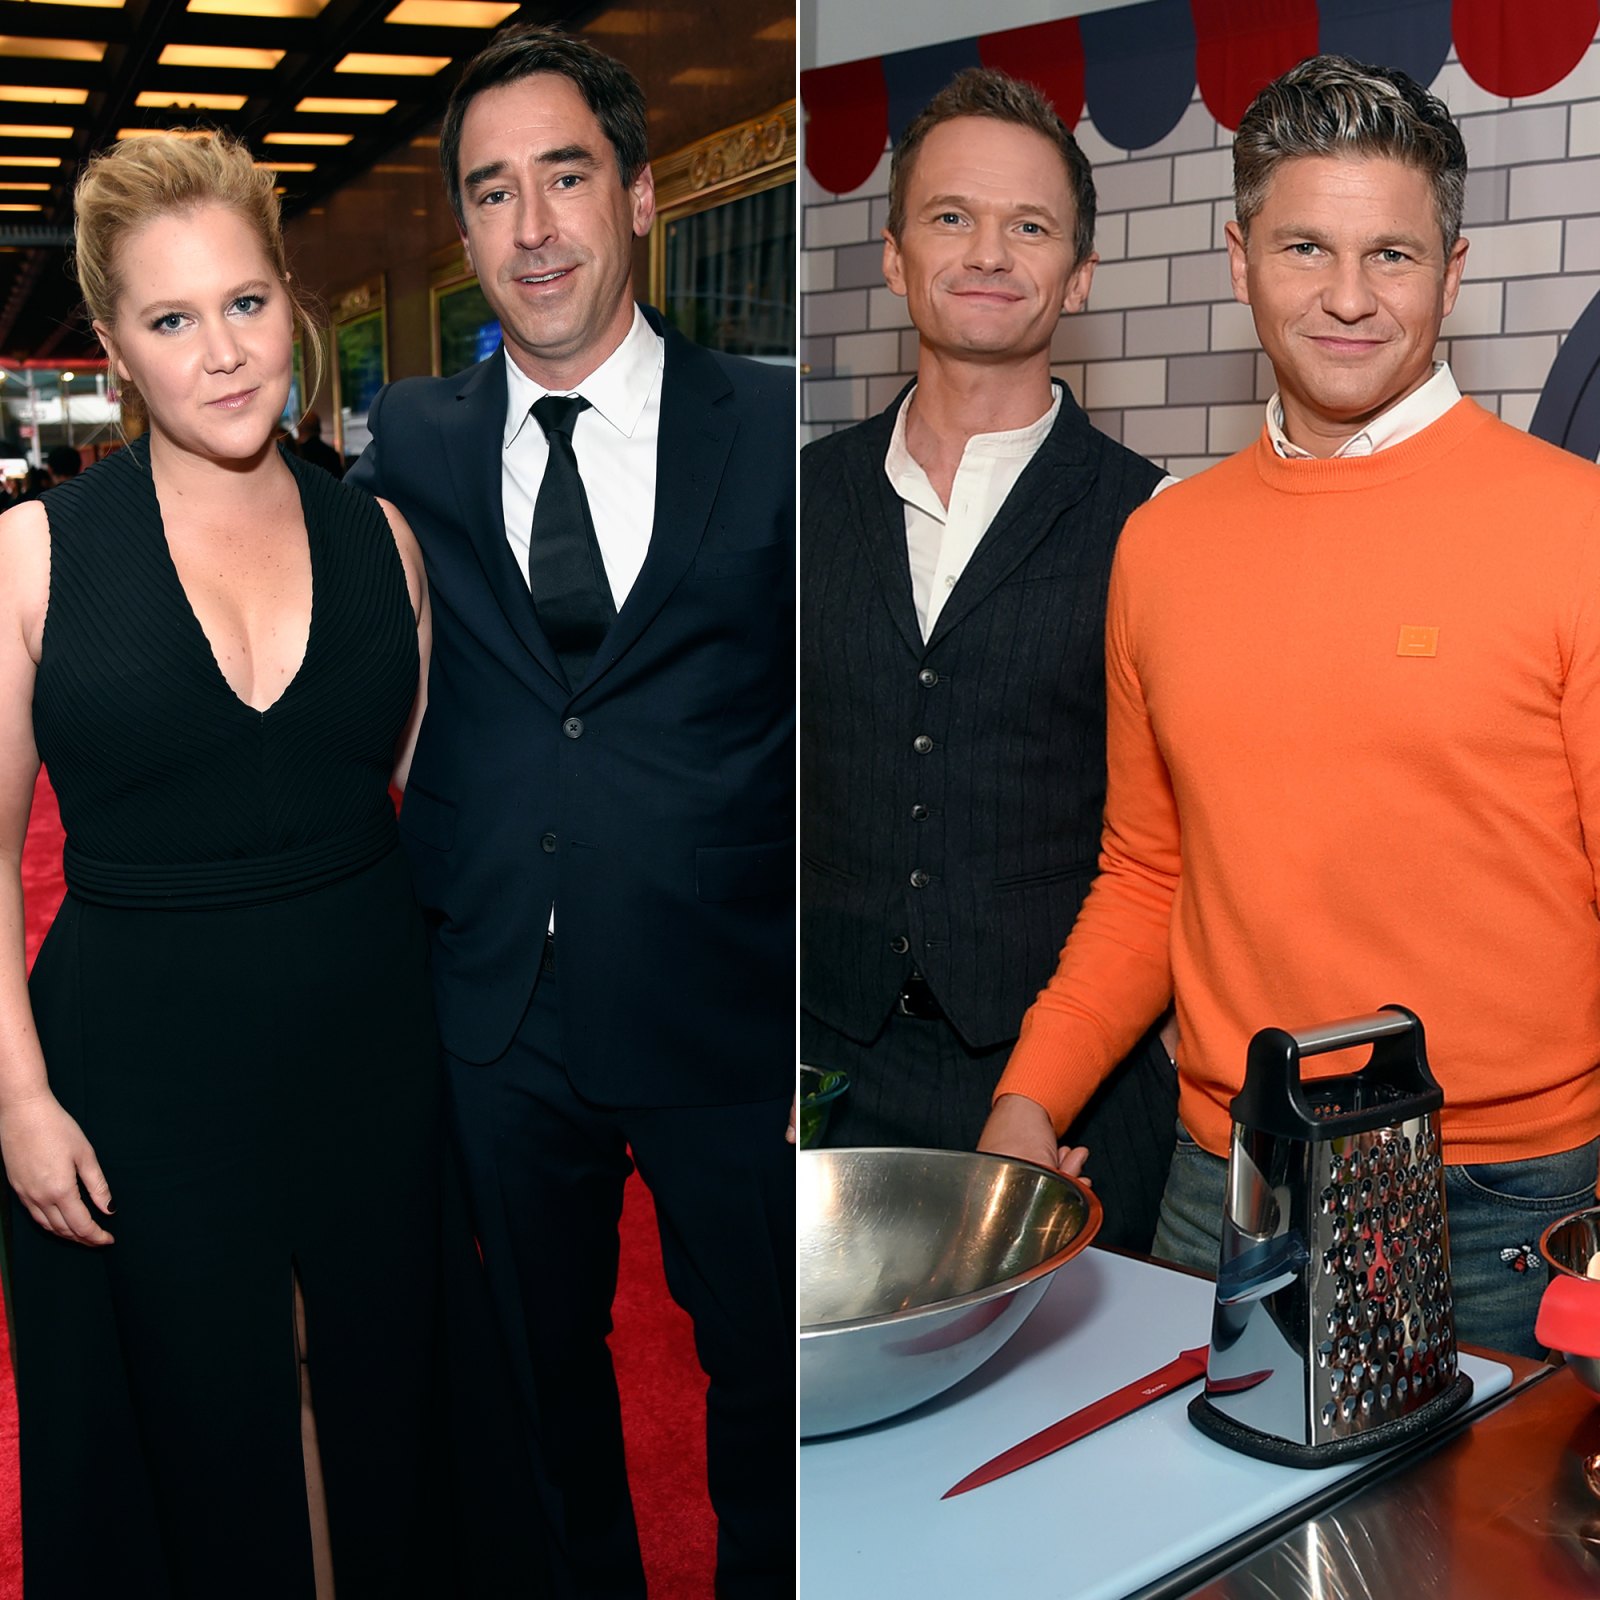 Celebrities Who Married Chefs: Amy Schumer, Neil Patrick Harris and More